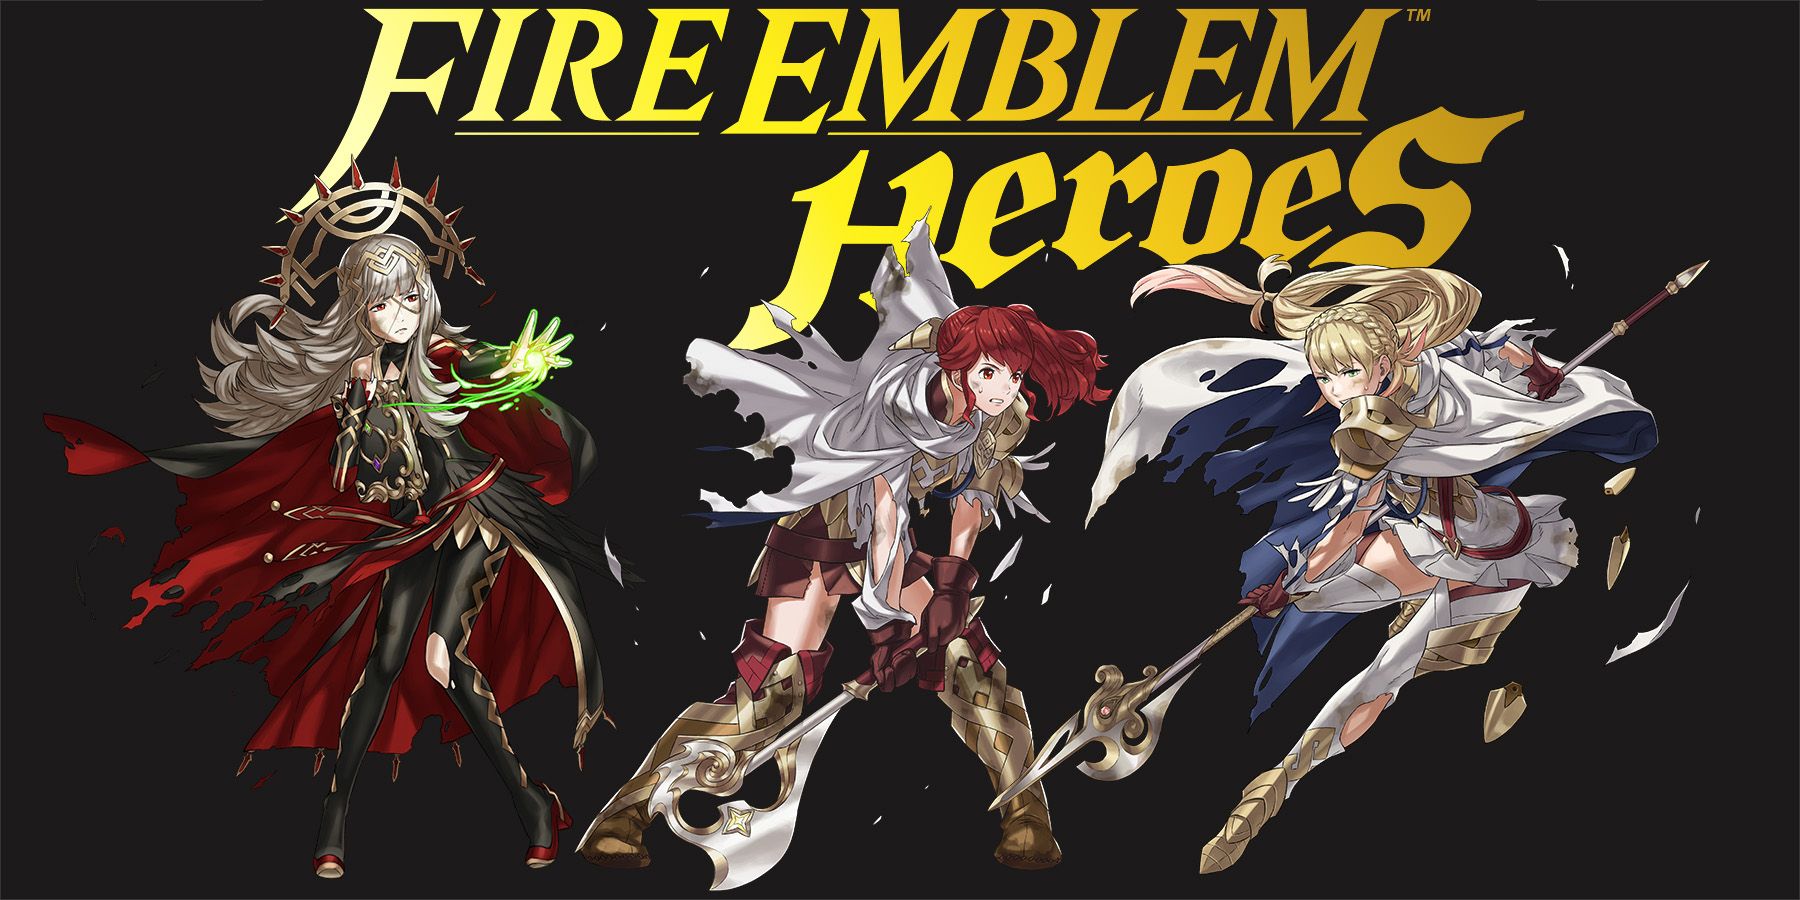 Fire Emblem Heroes yellow logo on dark background with 3 characters in combat poses